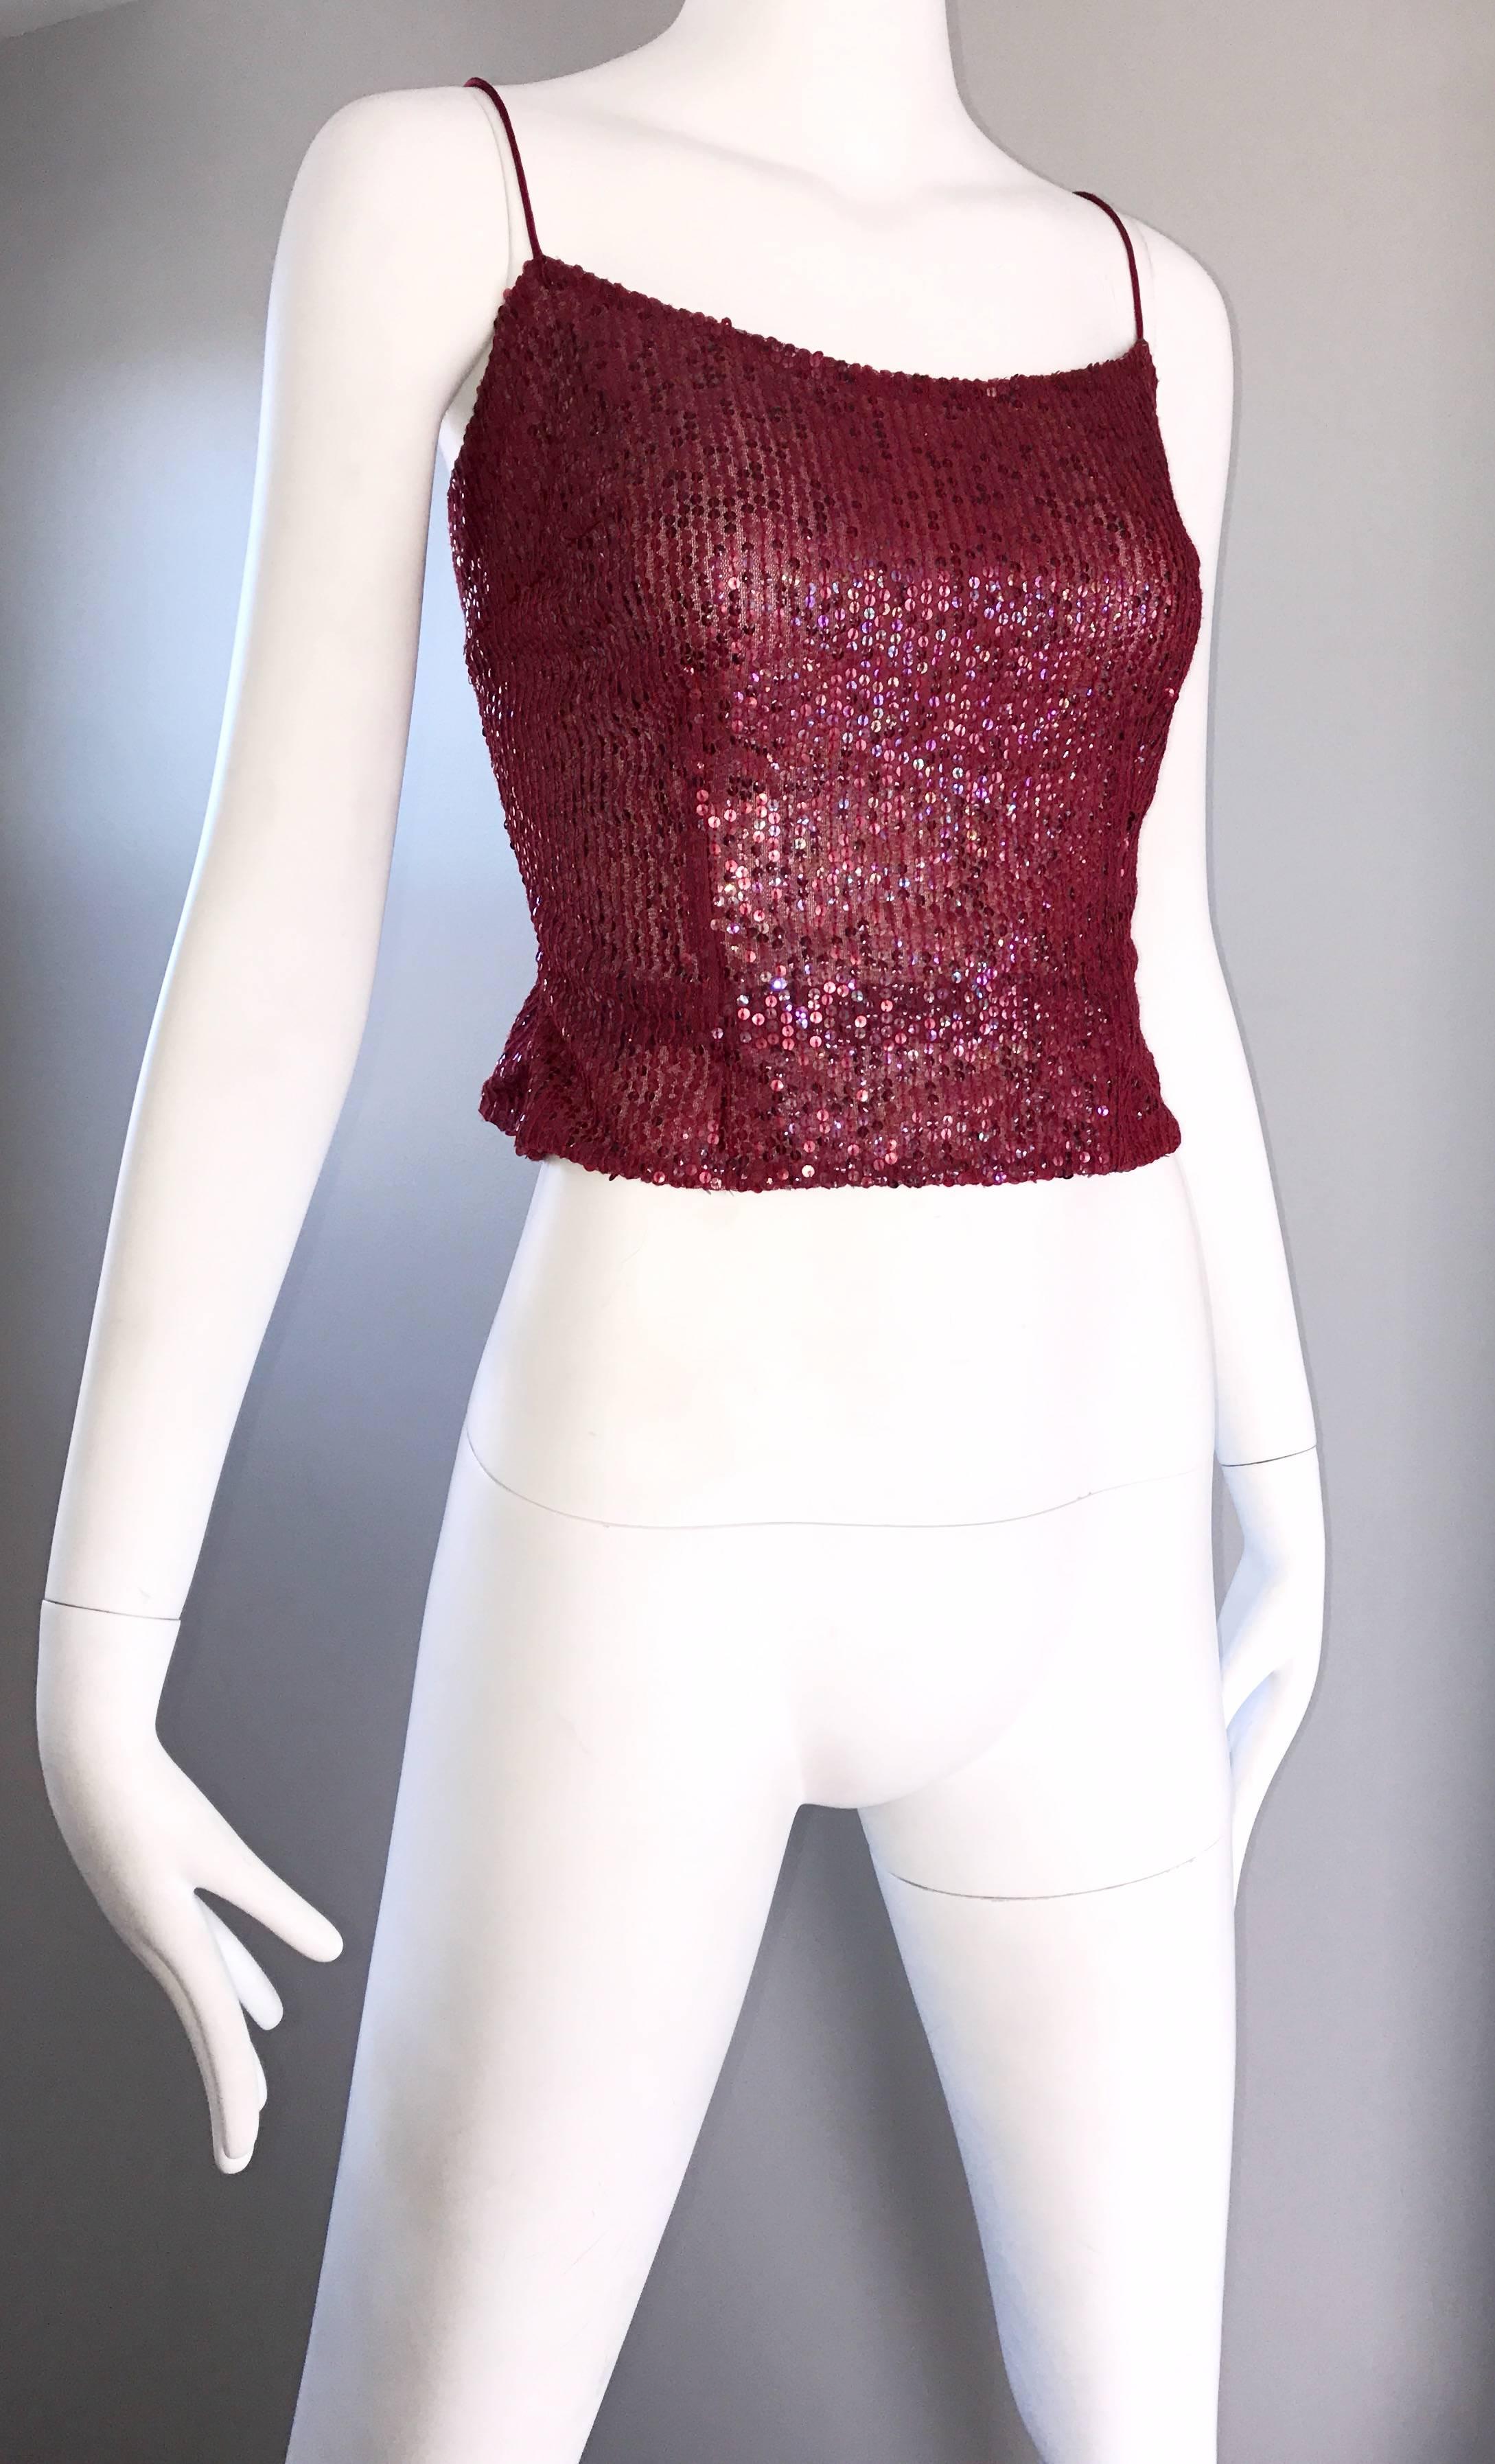 Women's Vintage Liancarlo 1990s Red Wine Colored Fully Sequined Silk 90s Top Blouse